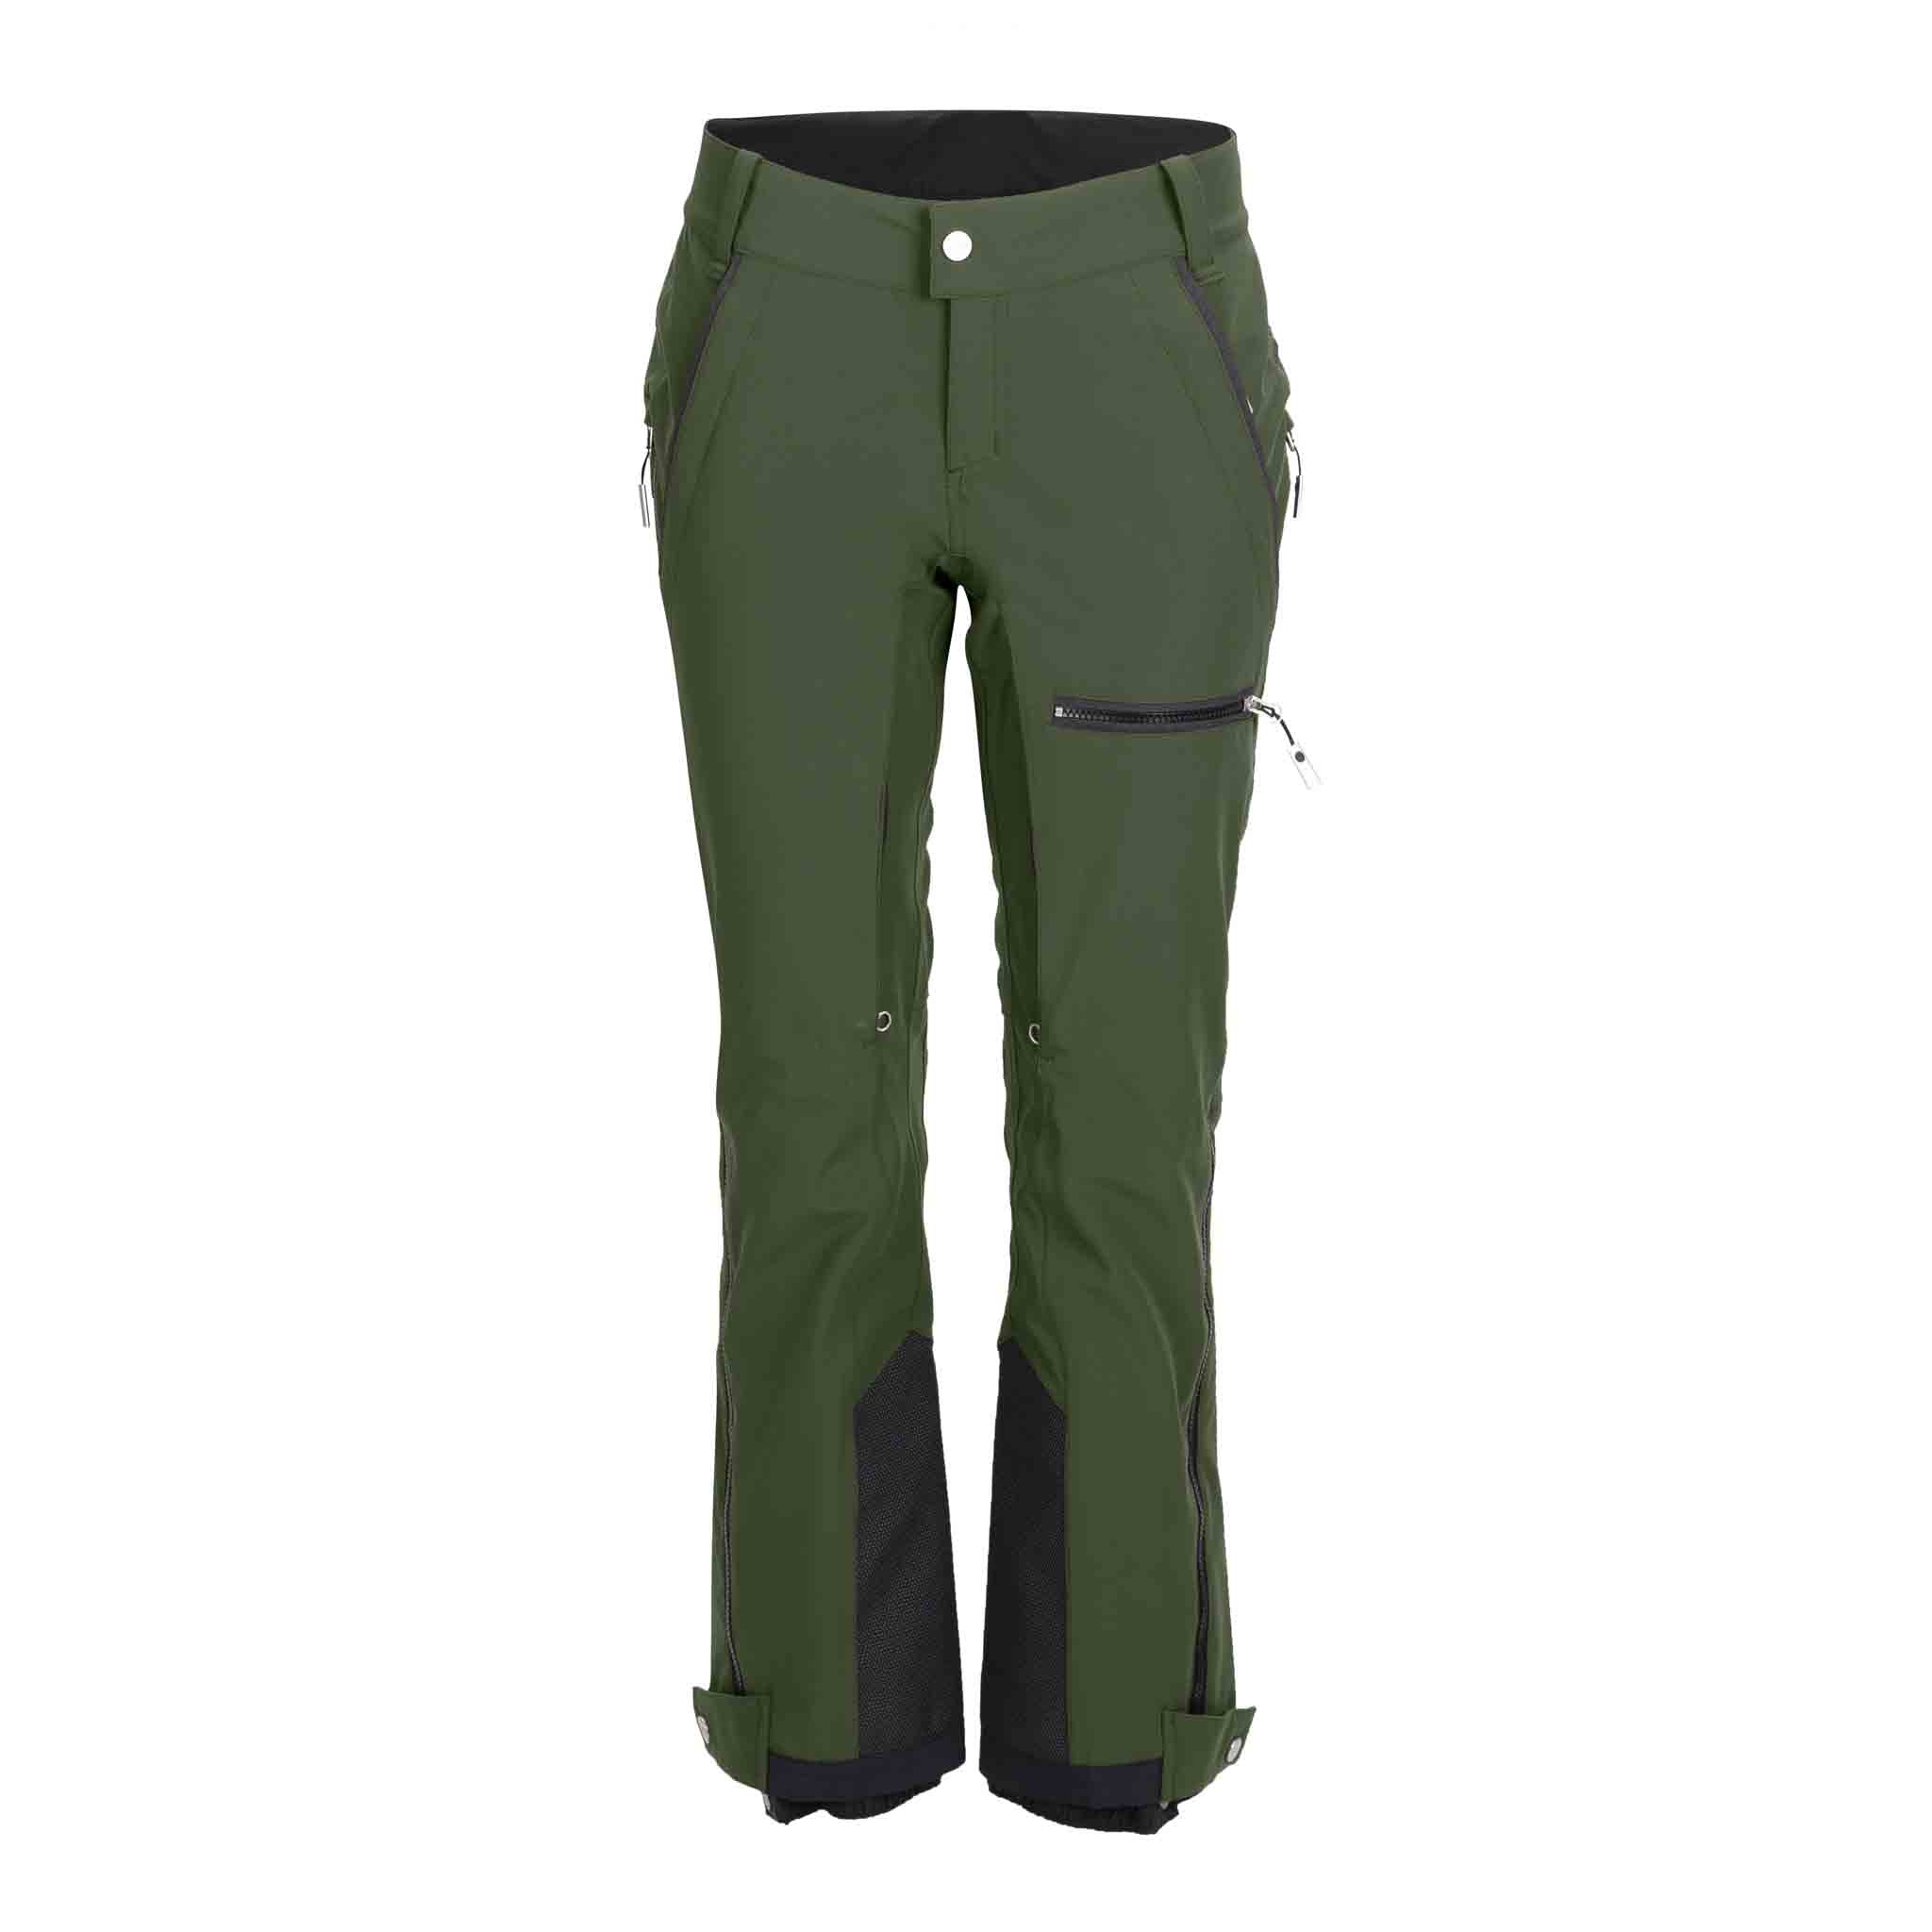 8120 Pant | Insulated Ski Pant For Women | SYNC Performance